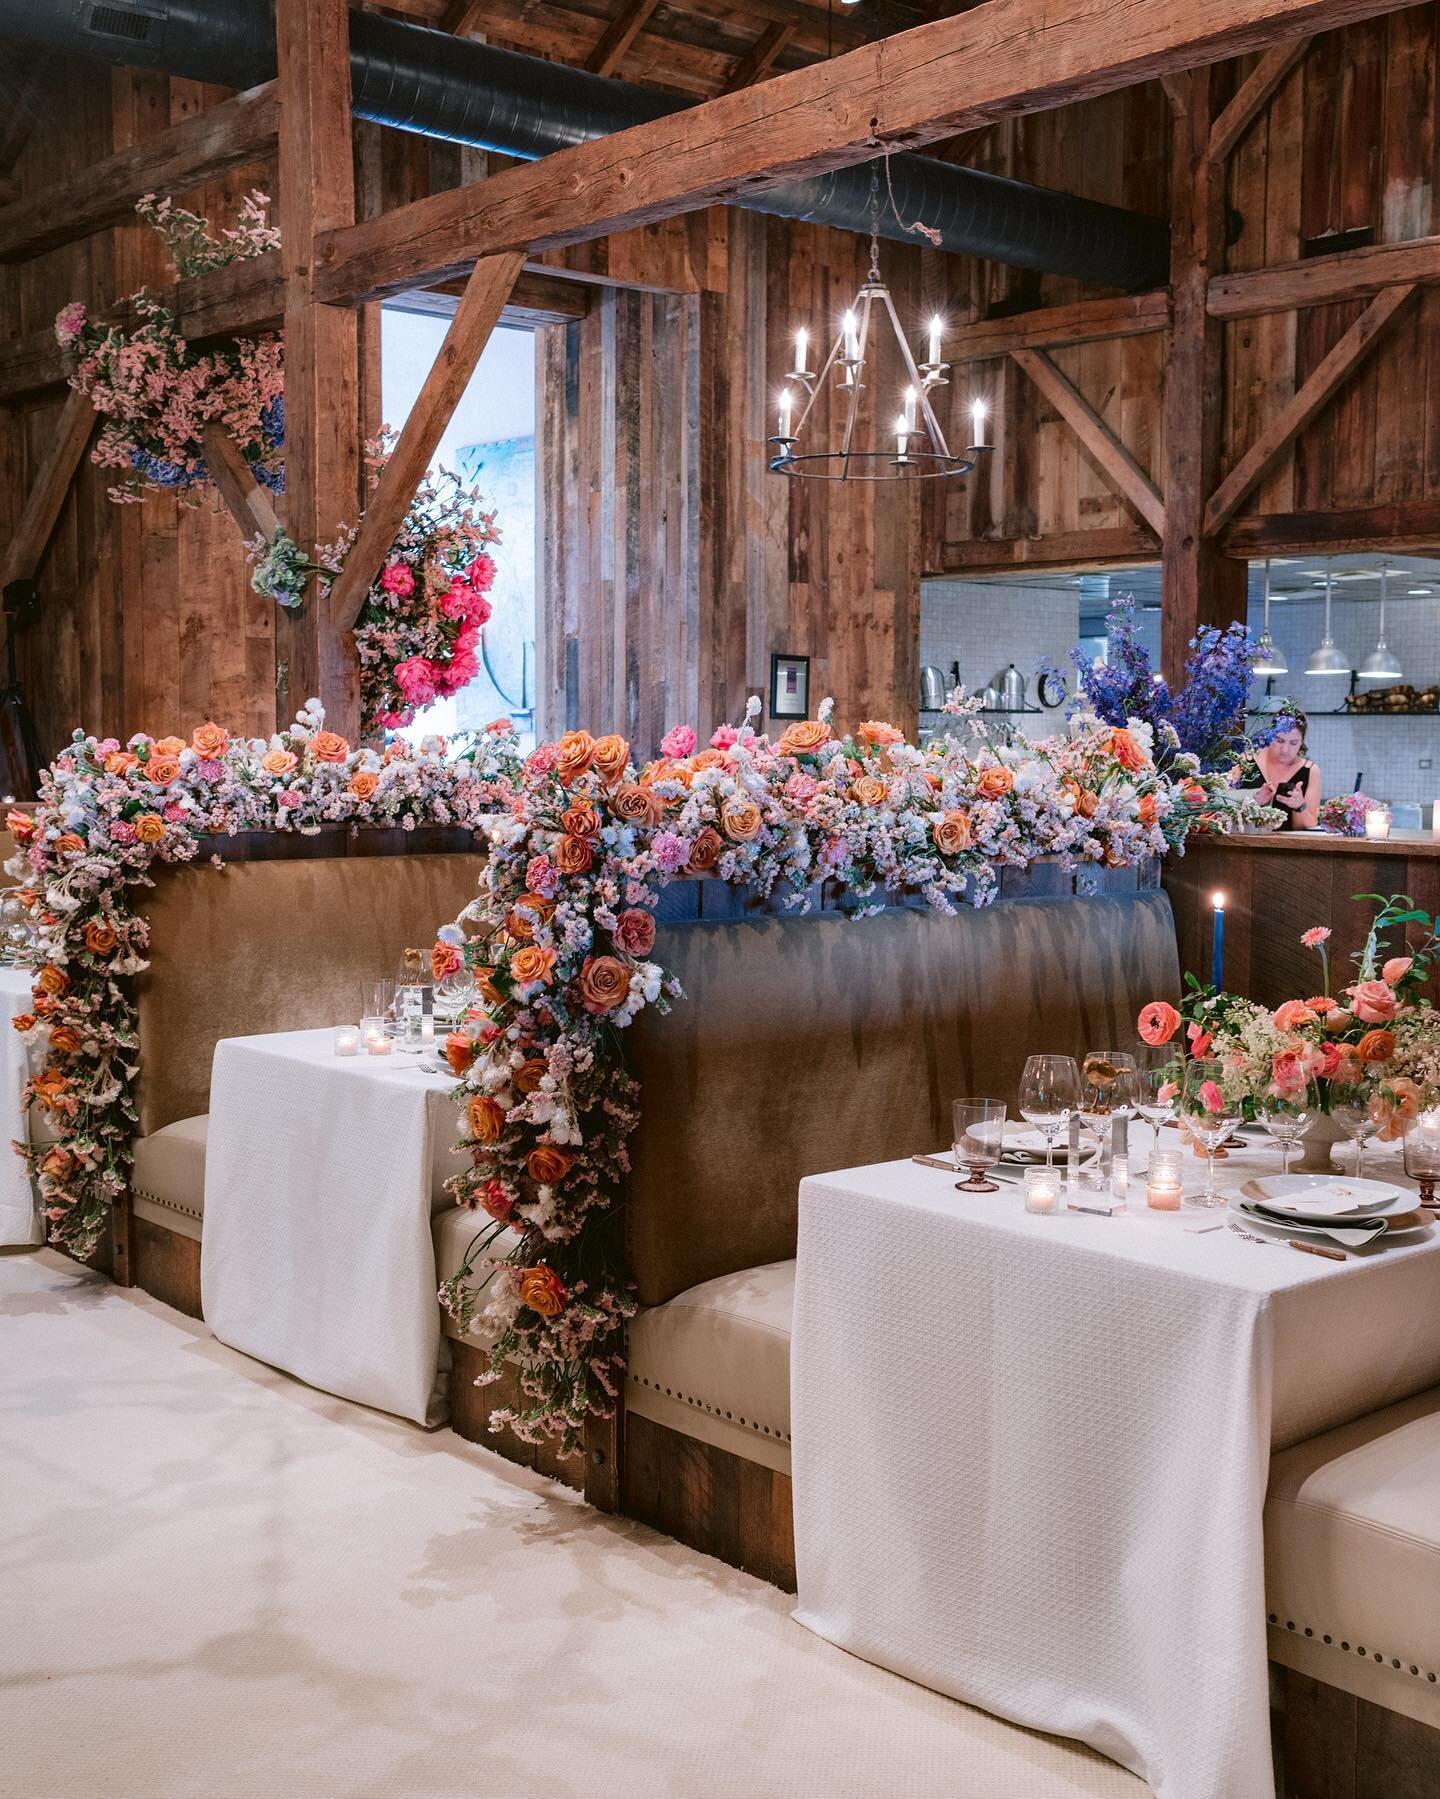 When the booths explode with flowers and a rustic barn with plaid carpet is transformed!
Sorry added the tent guy to the wedding day one.

For Wedding Day vendors are below:
Venue: @blackberryfarm
Planner Designer: @bustleevents
Floral Designer: @tul